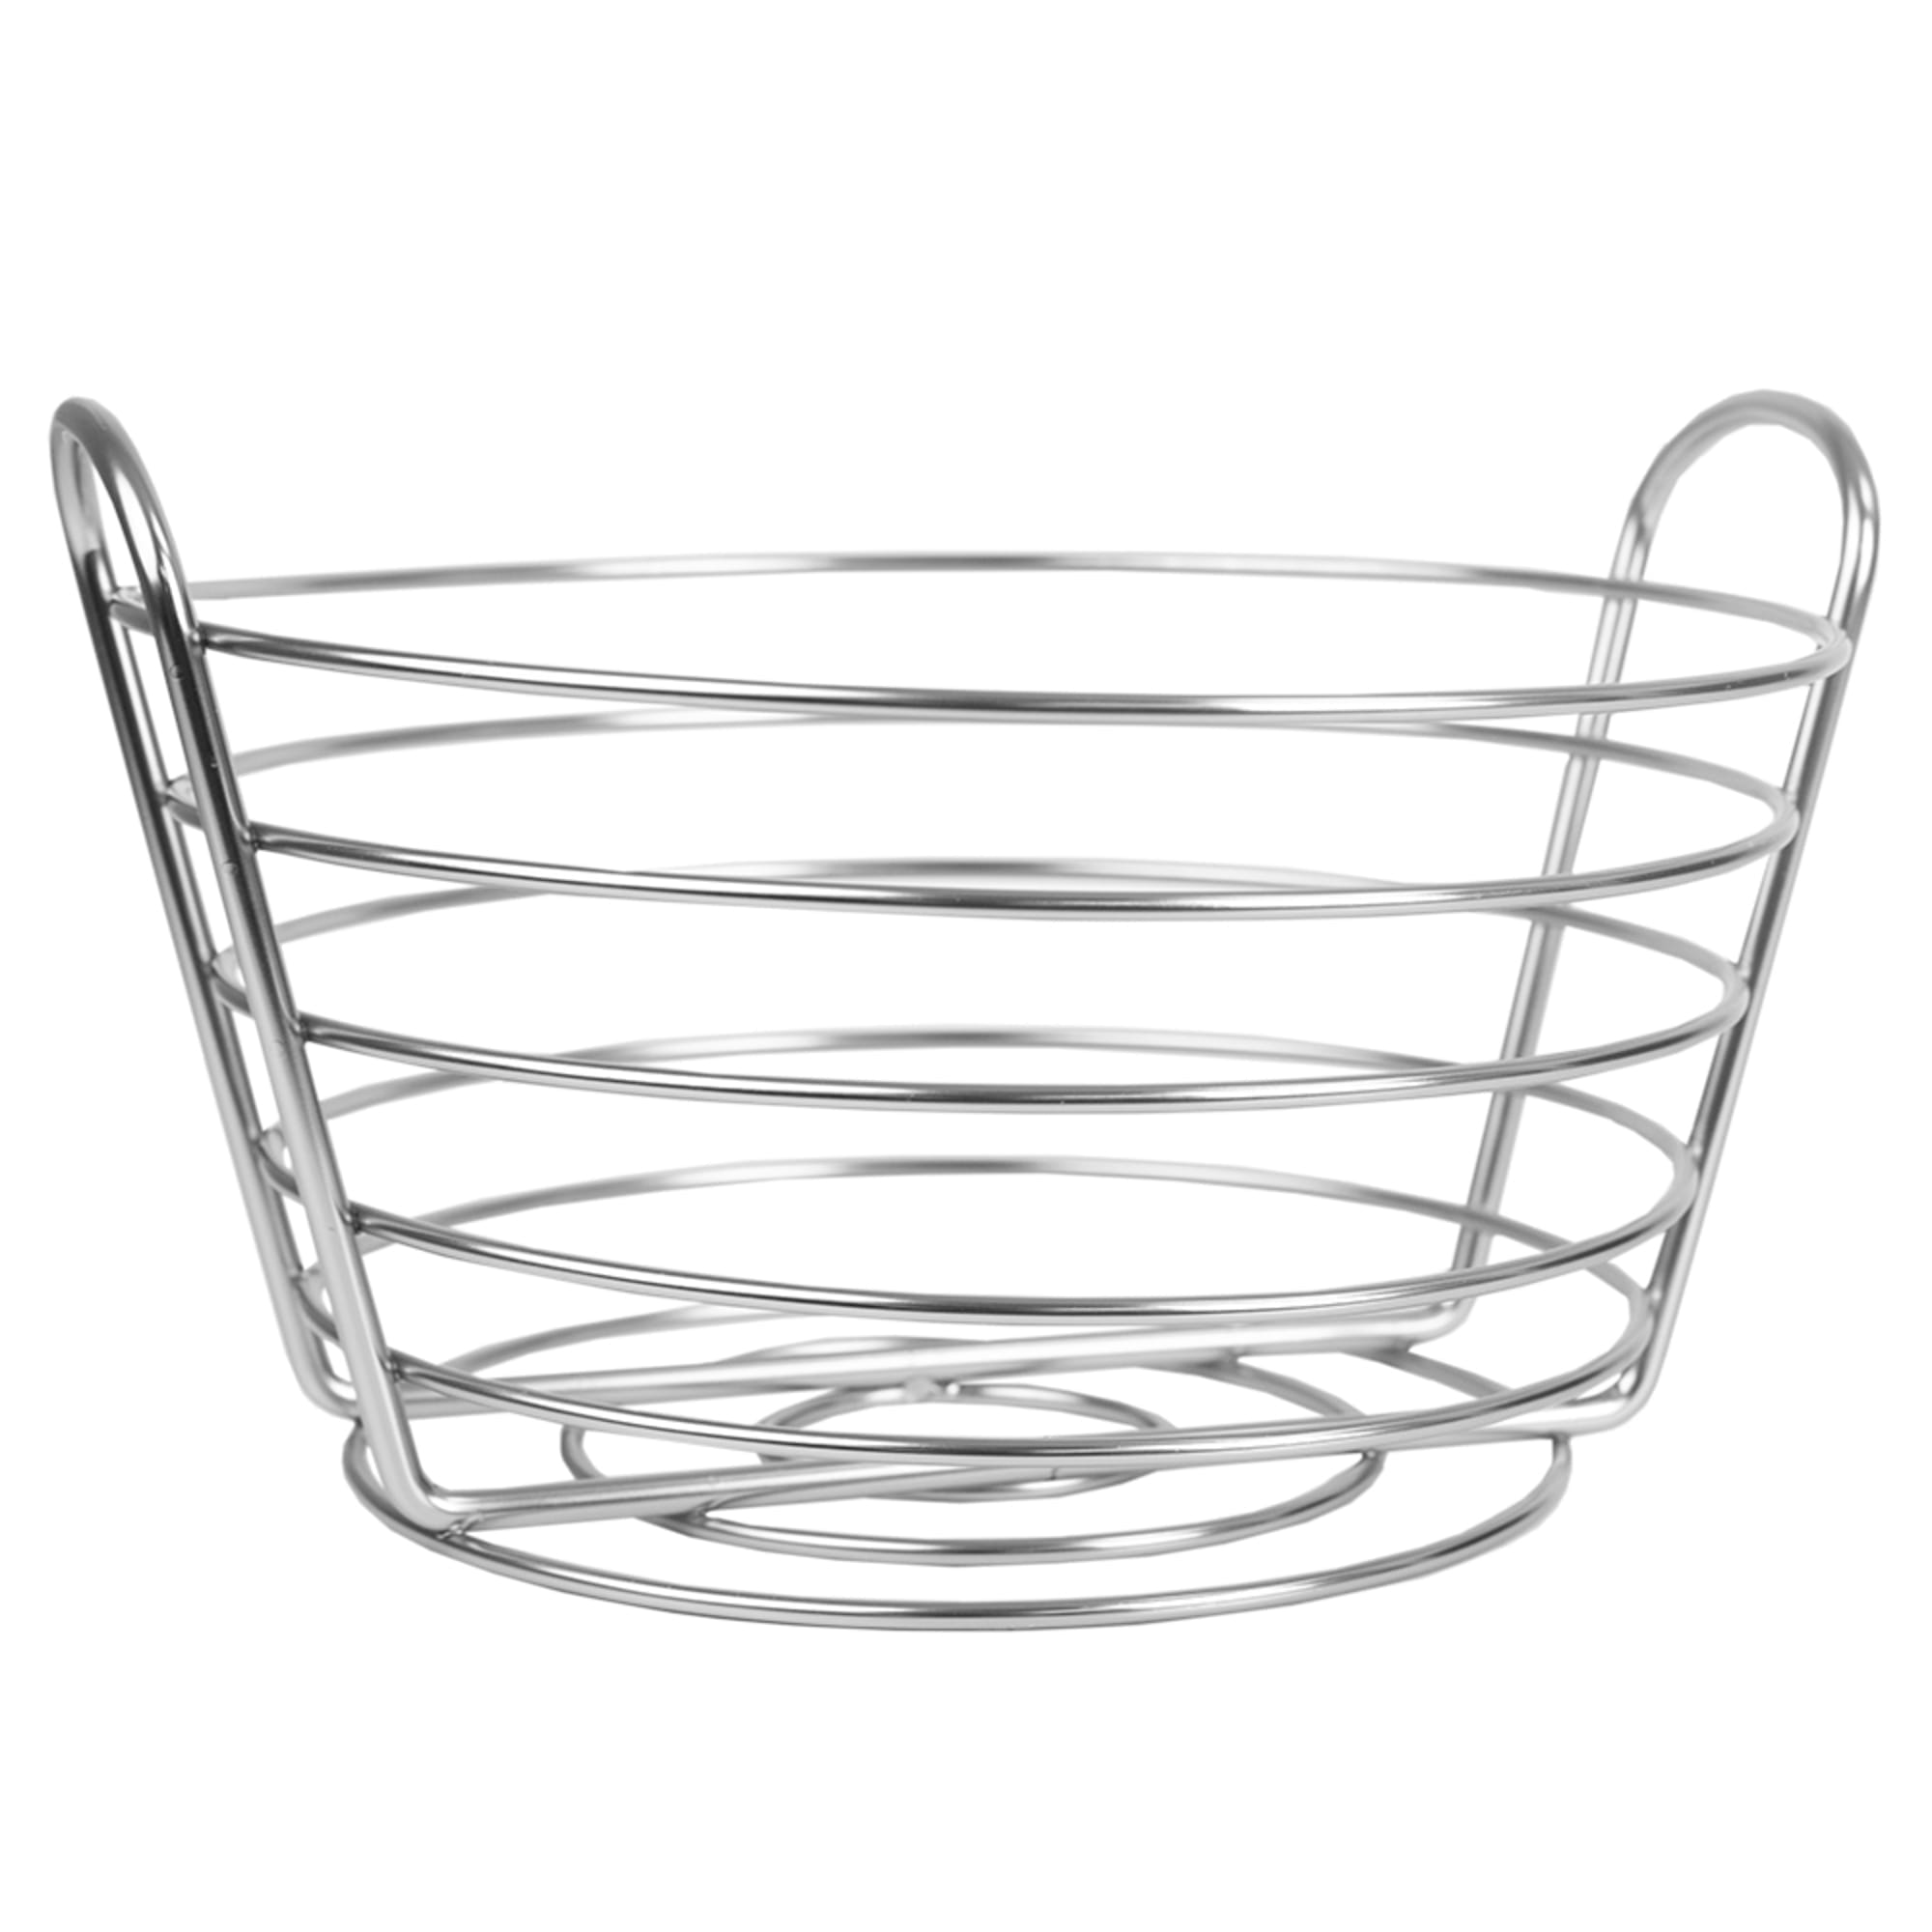 Home Basics Simplicity Collection Fruit Basket, Satin Chrome $10.00 EACH, CASE PACK OF 12